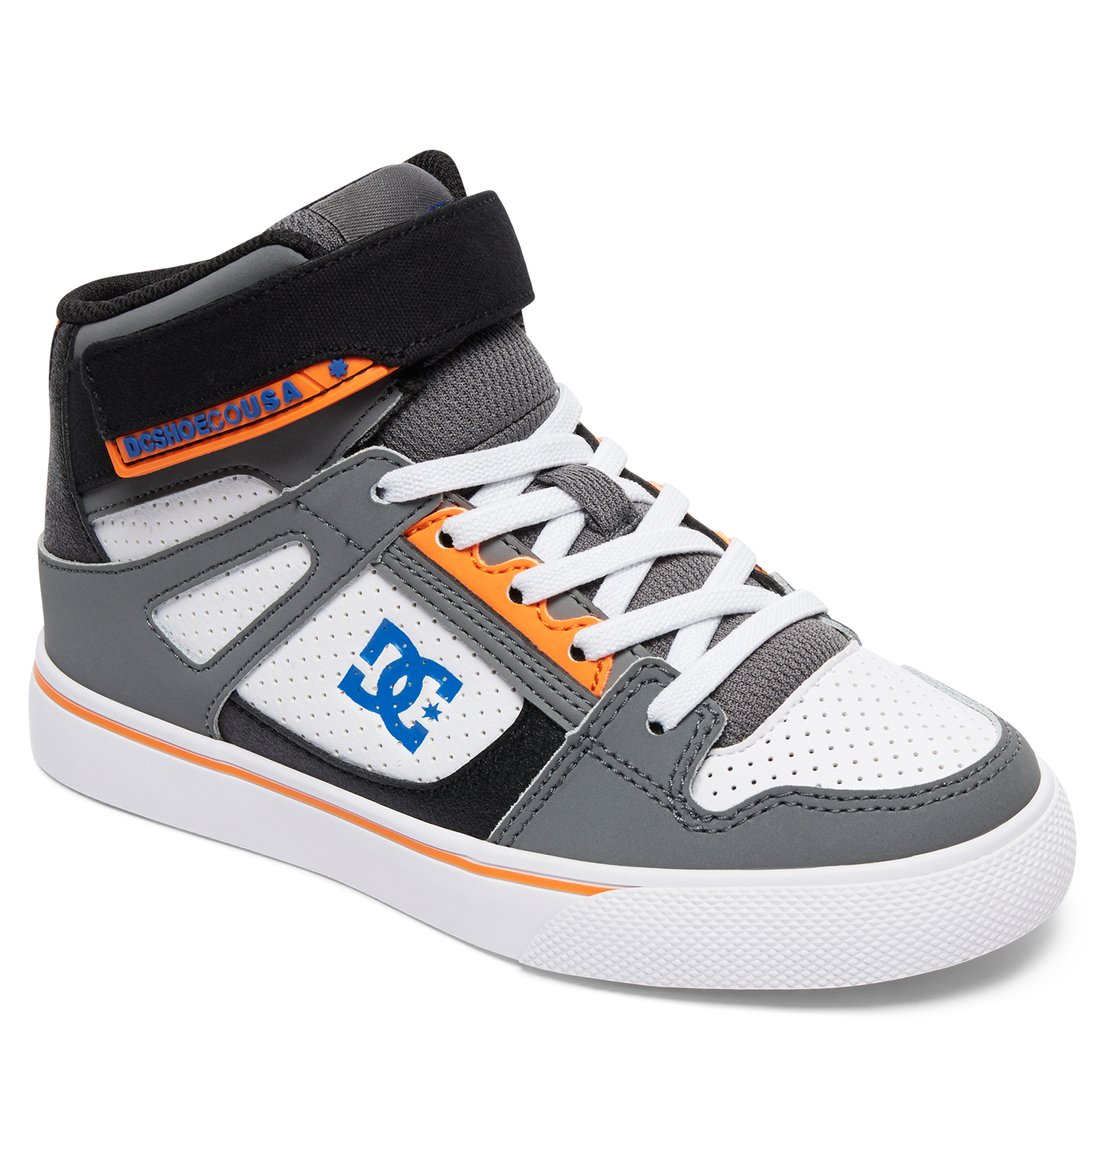 Pure High EV - High-Top Shoes ADBS300260 | DC Shoes